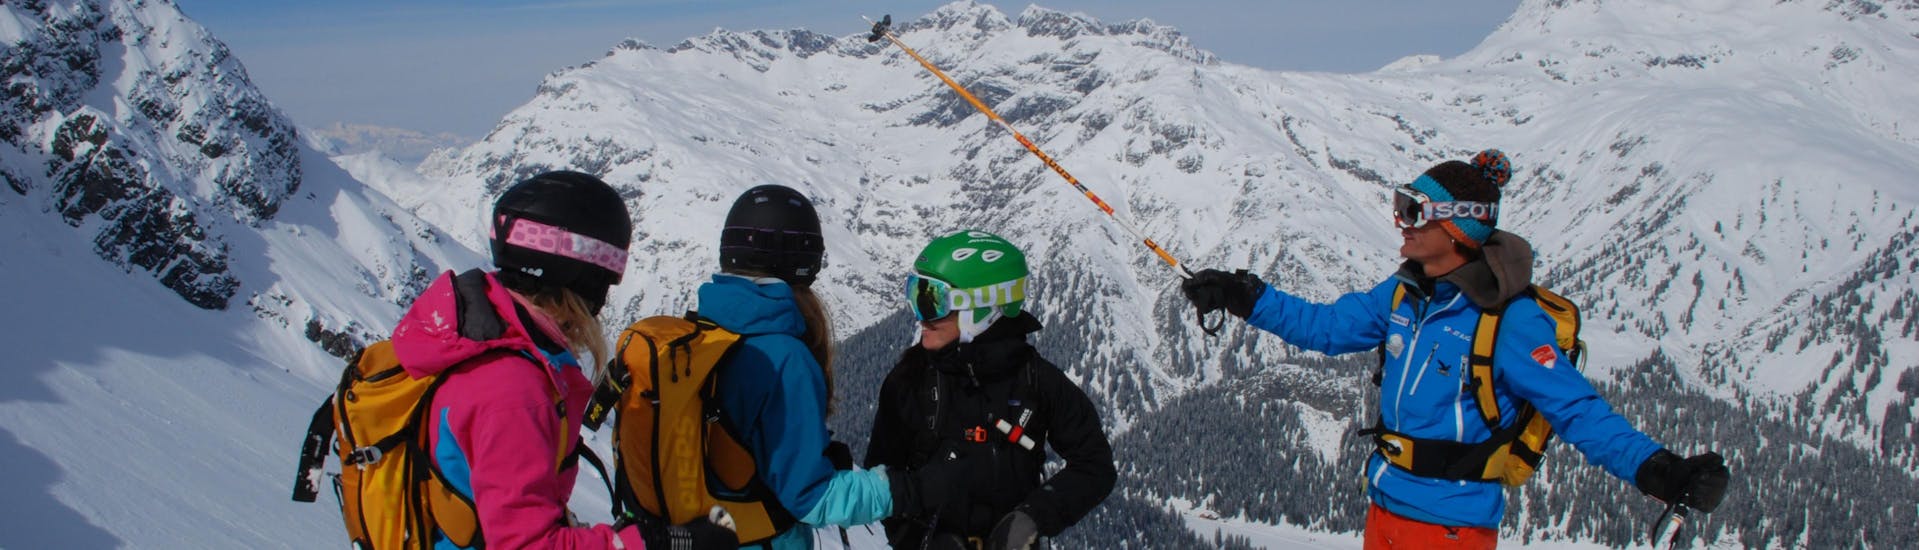 A group of skiers on the mountain tops during their private ski lessons for kids of all ages in Lech with ski school Warth.